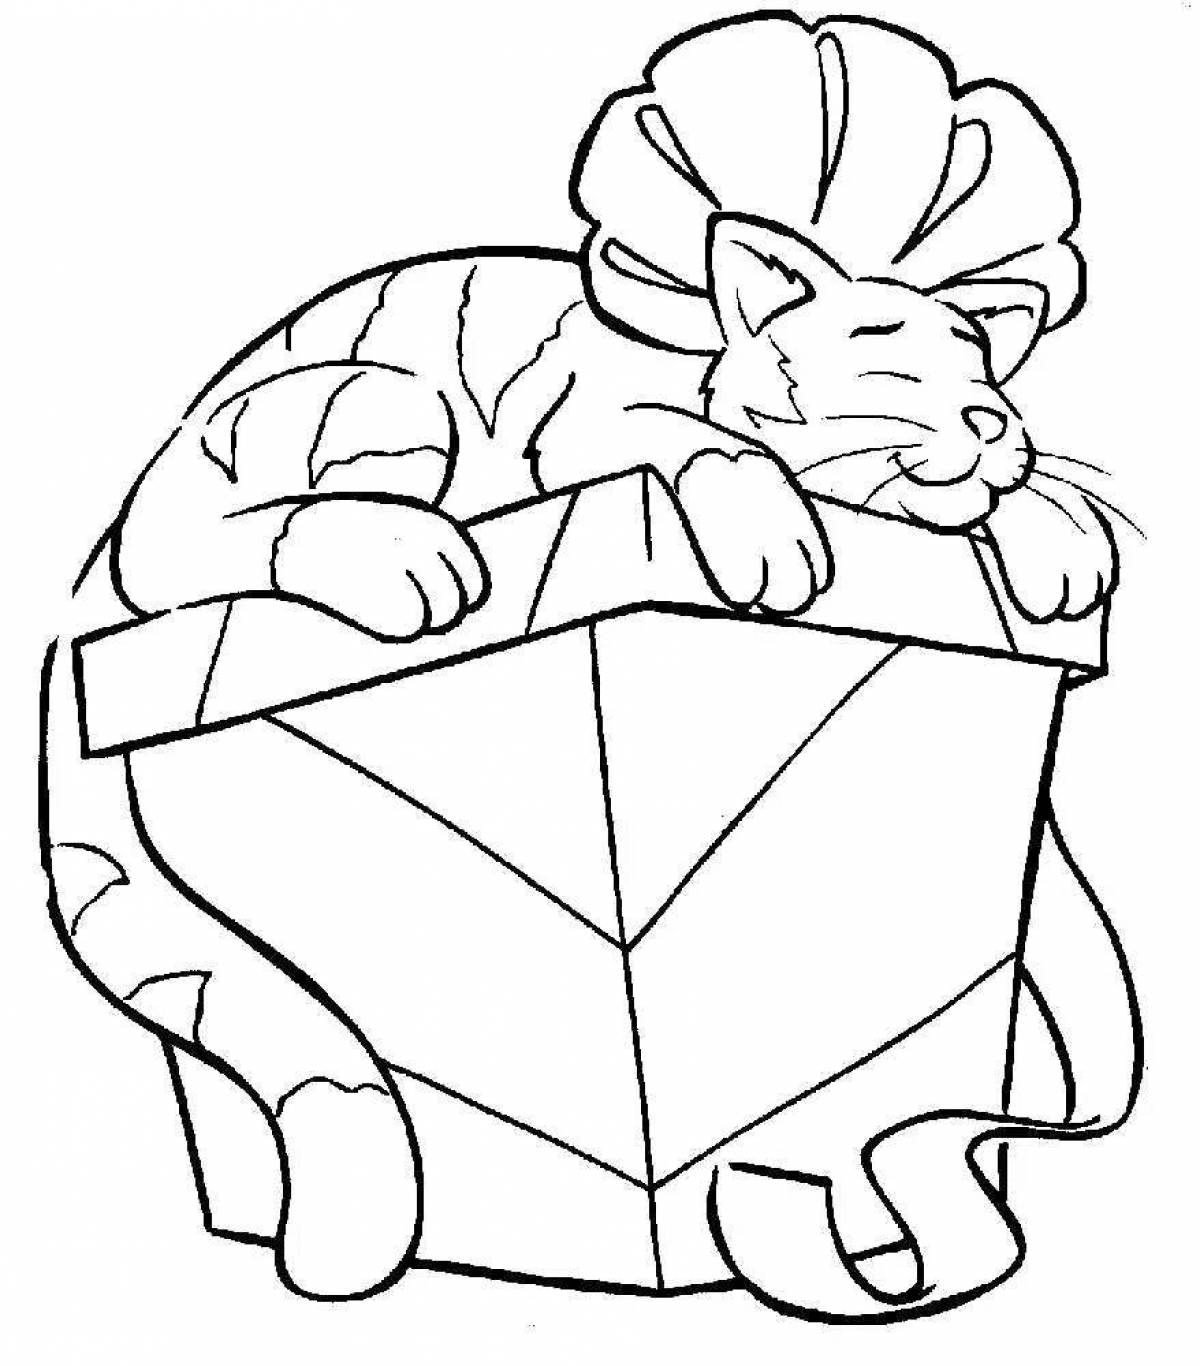 Coloring book silent cat in a box